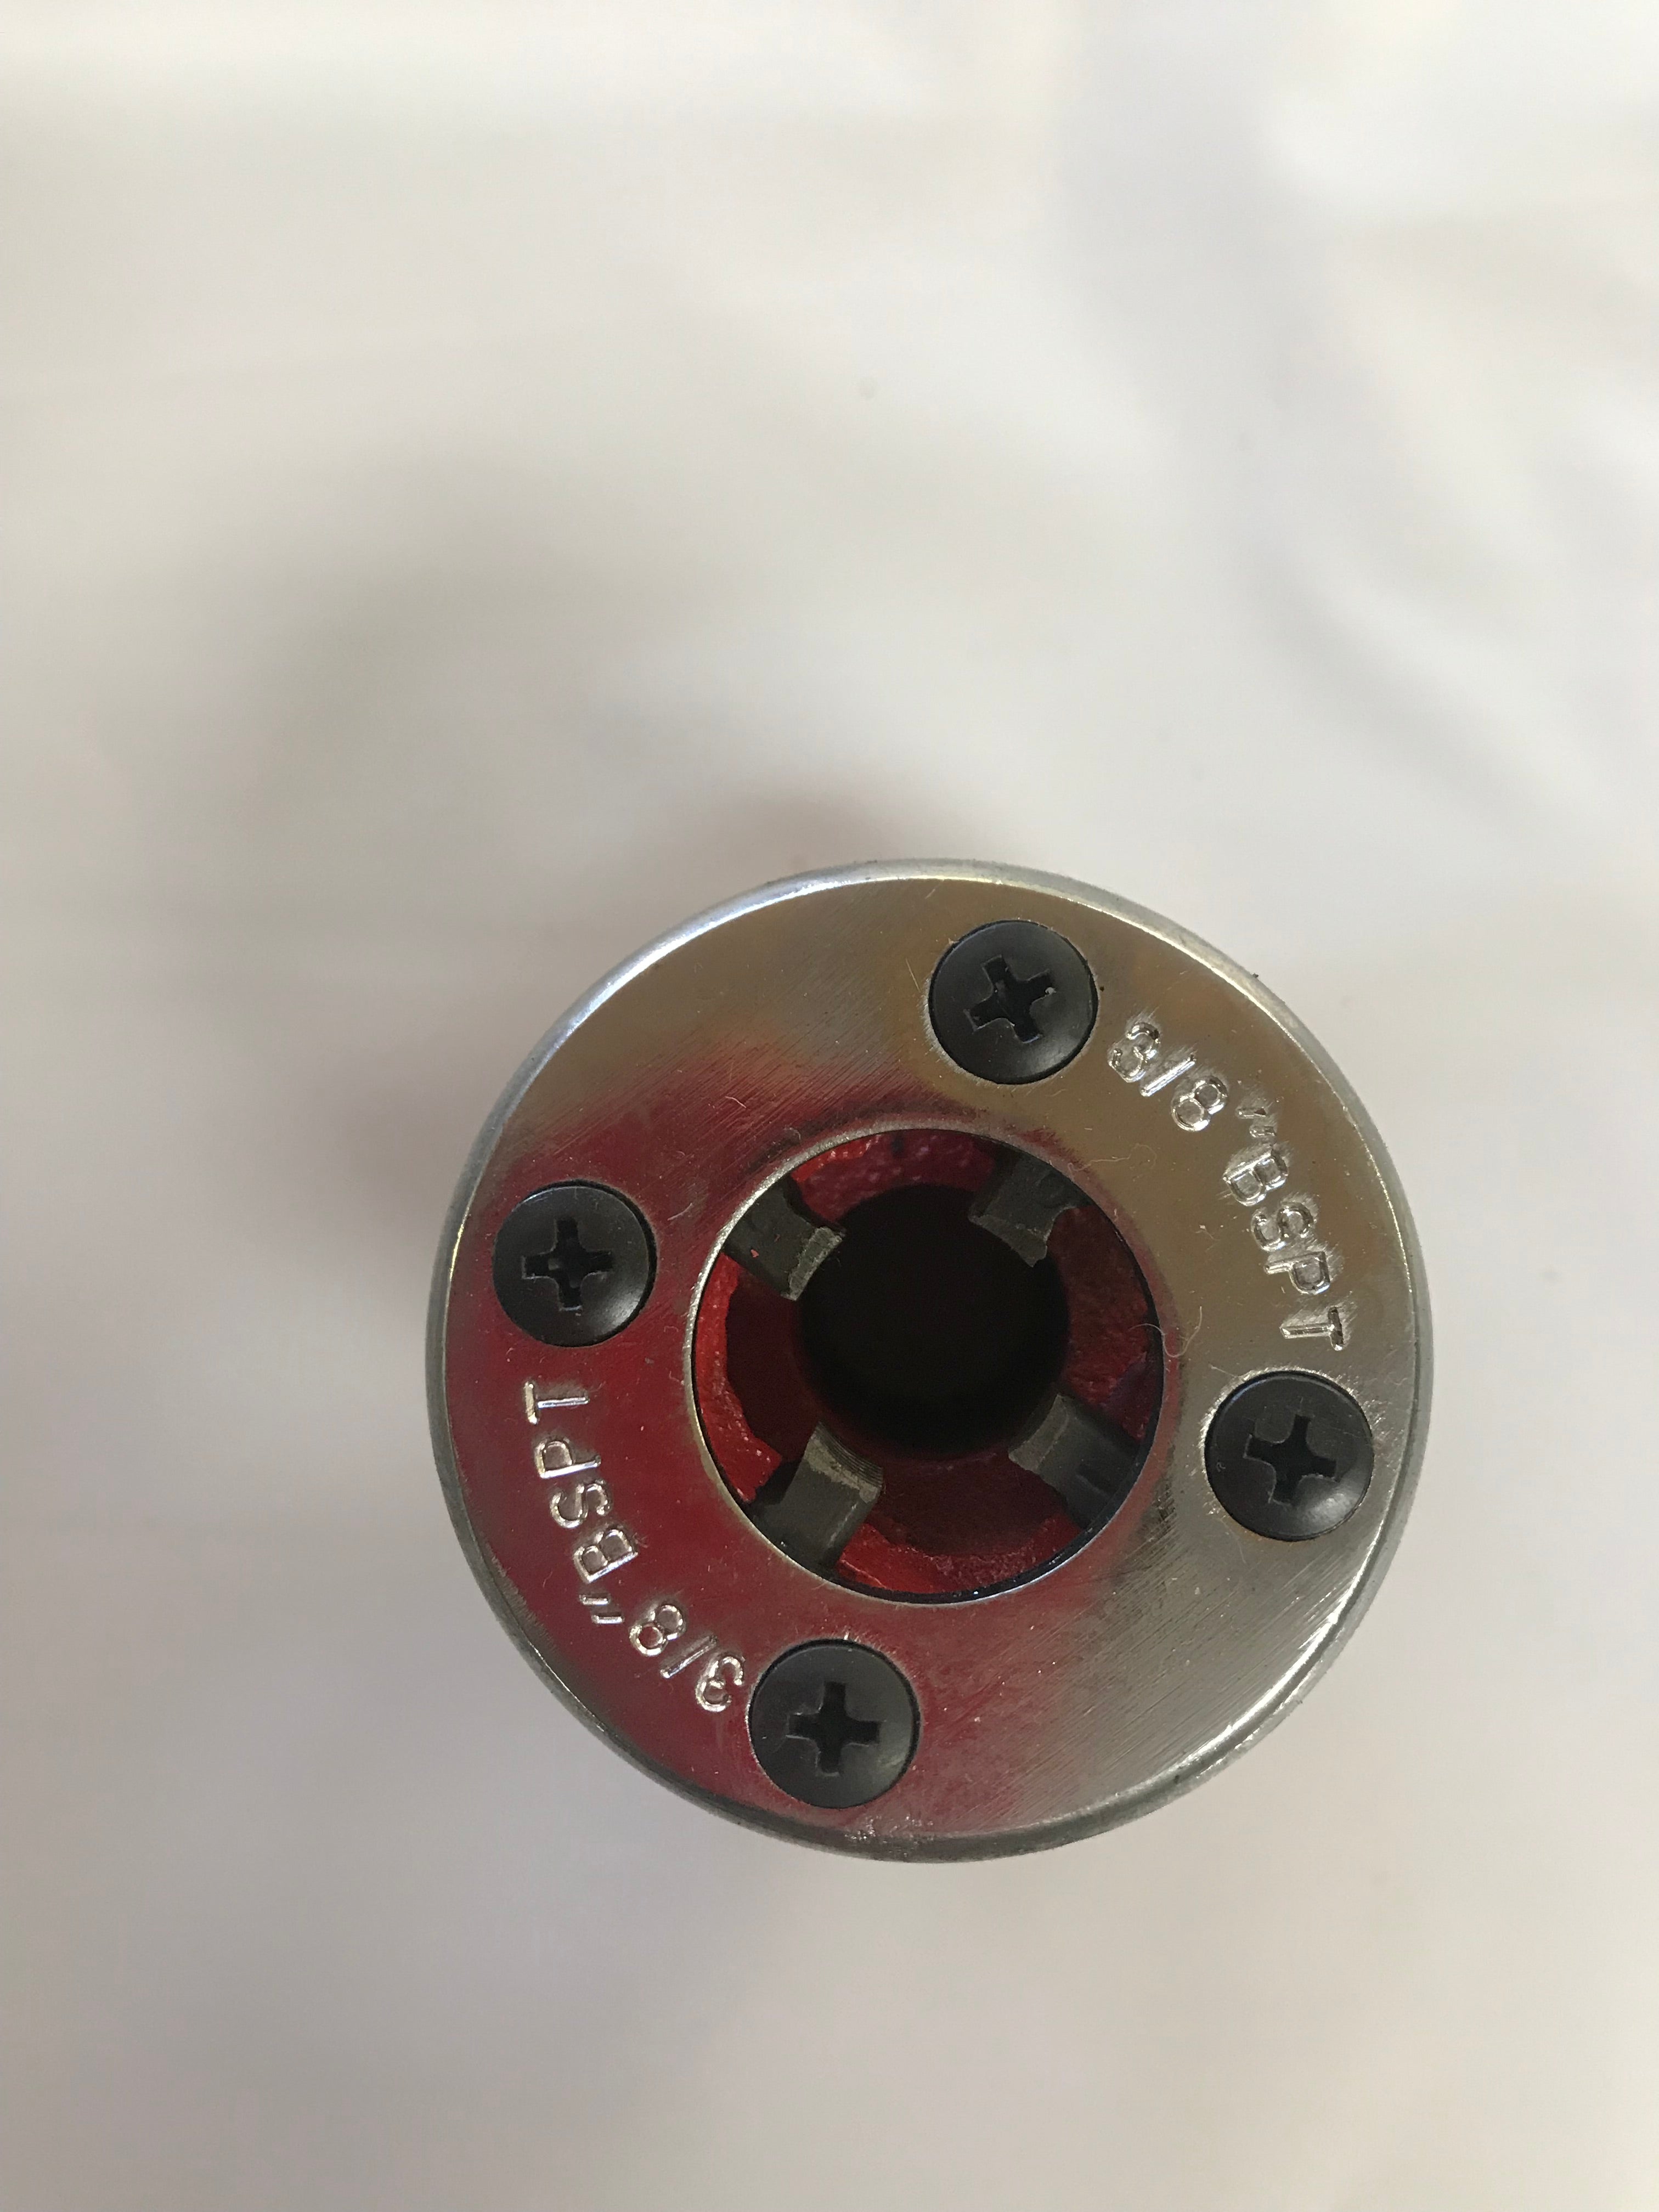 3/8" Pipe Threader Die for Ratcheting Handle - tool